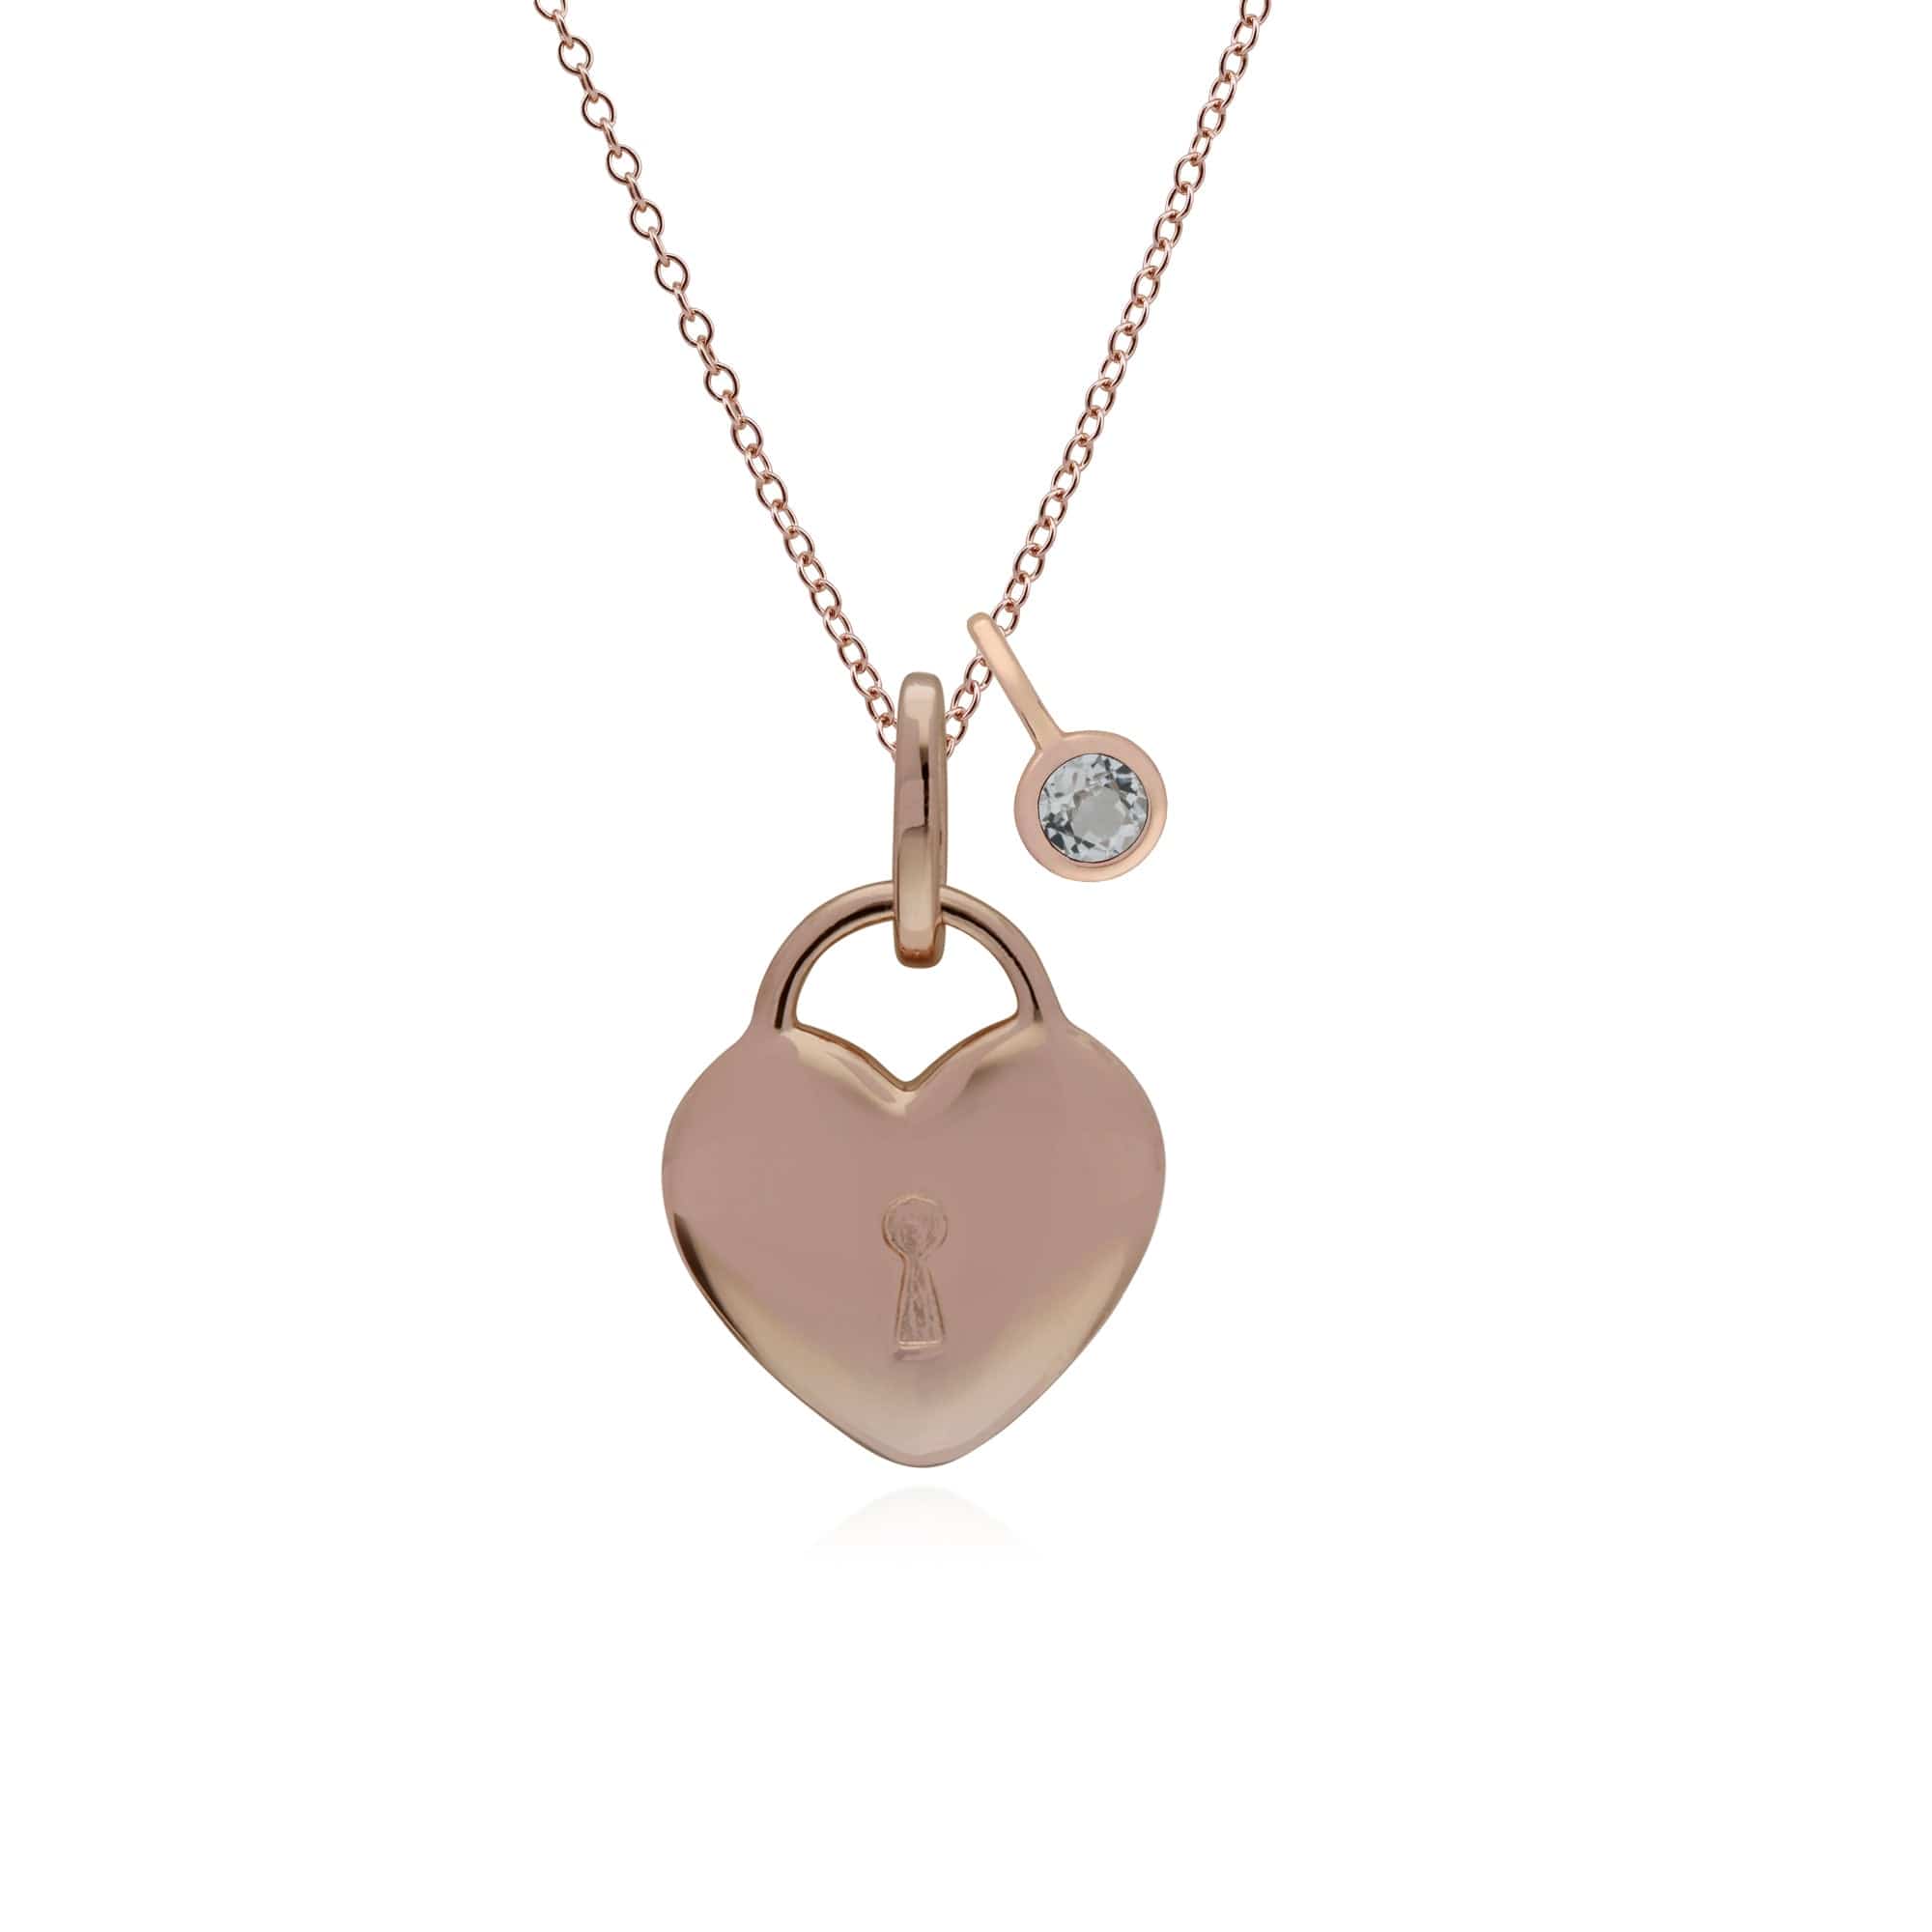 270P027308925-270P026901925 Classic Heart Lock Pendant & Clear Topaz Charm in Rose Gold Plated 925 Sterling Silver 1